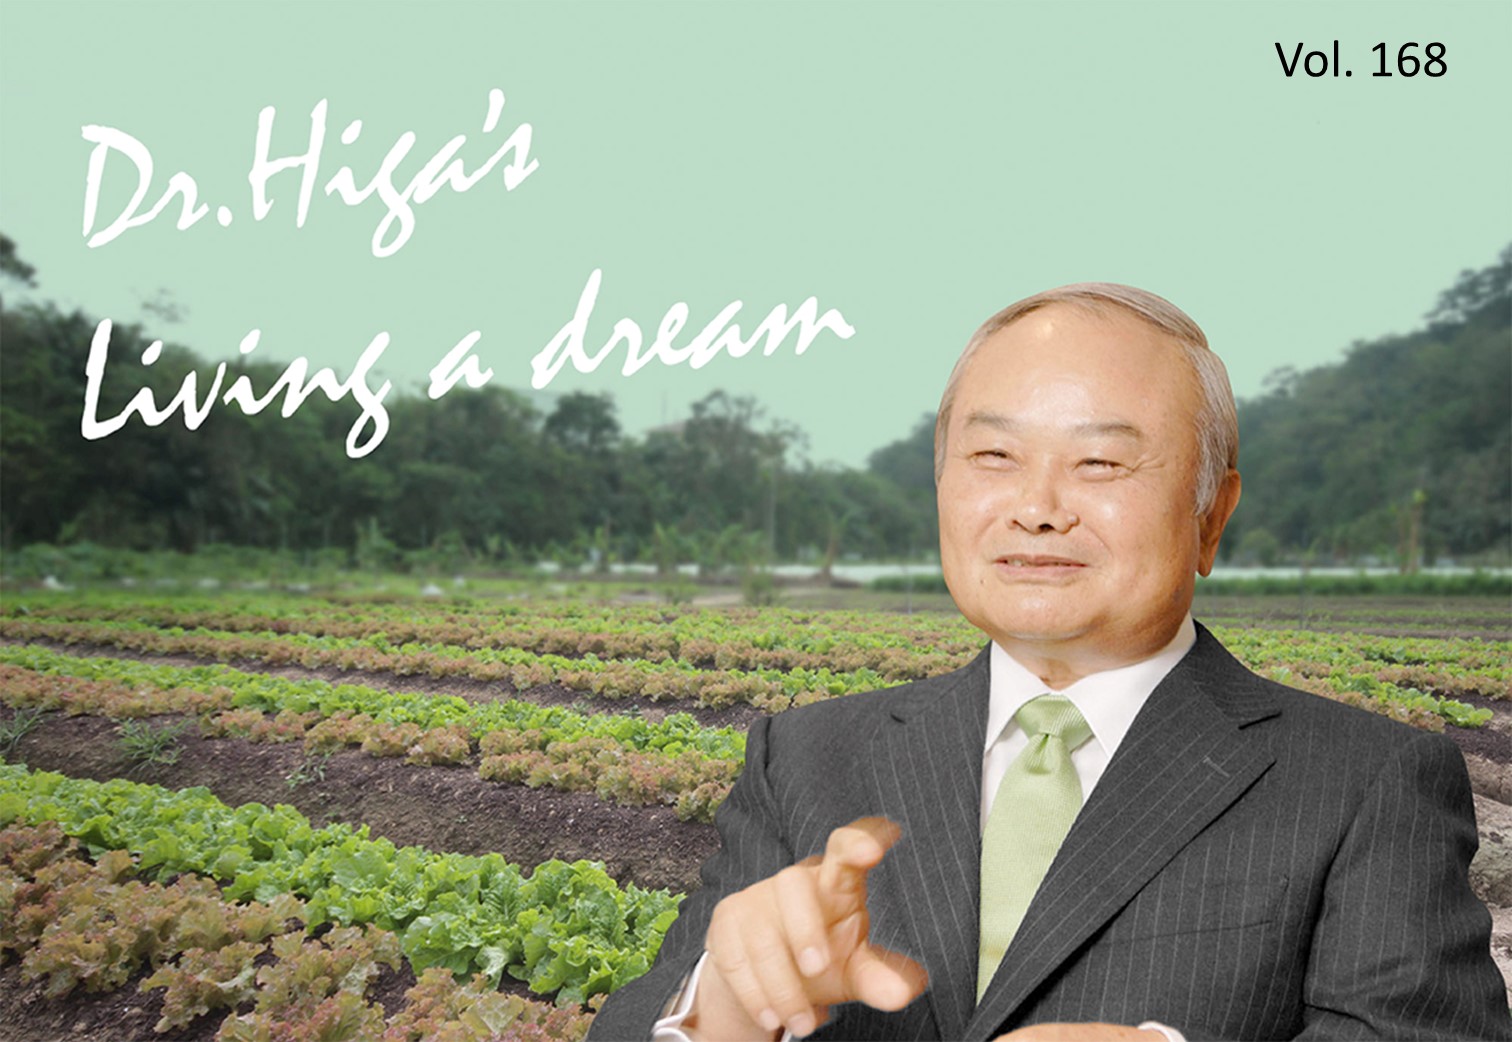 Dr. Higa's "Living a Dream": the latest article #168 is up!!!